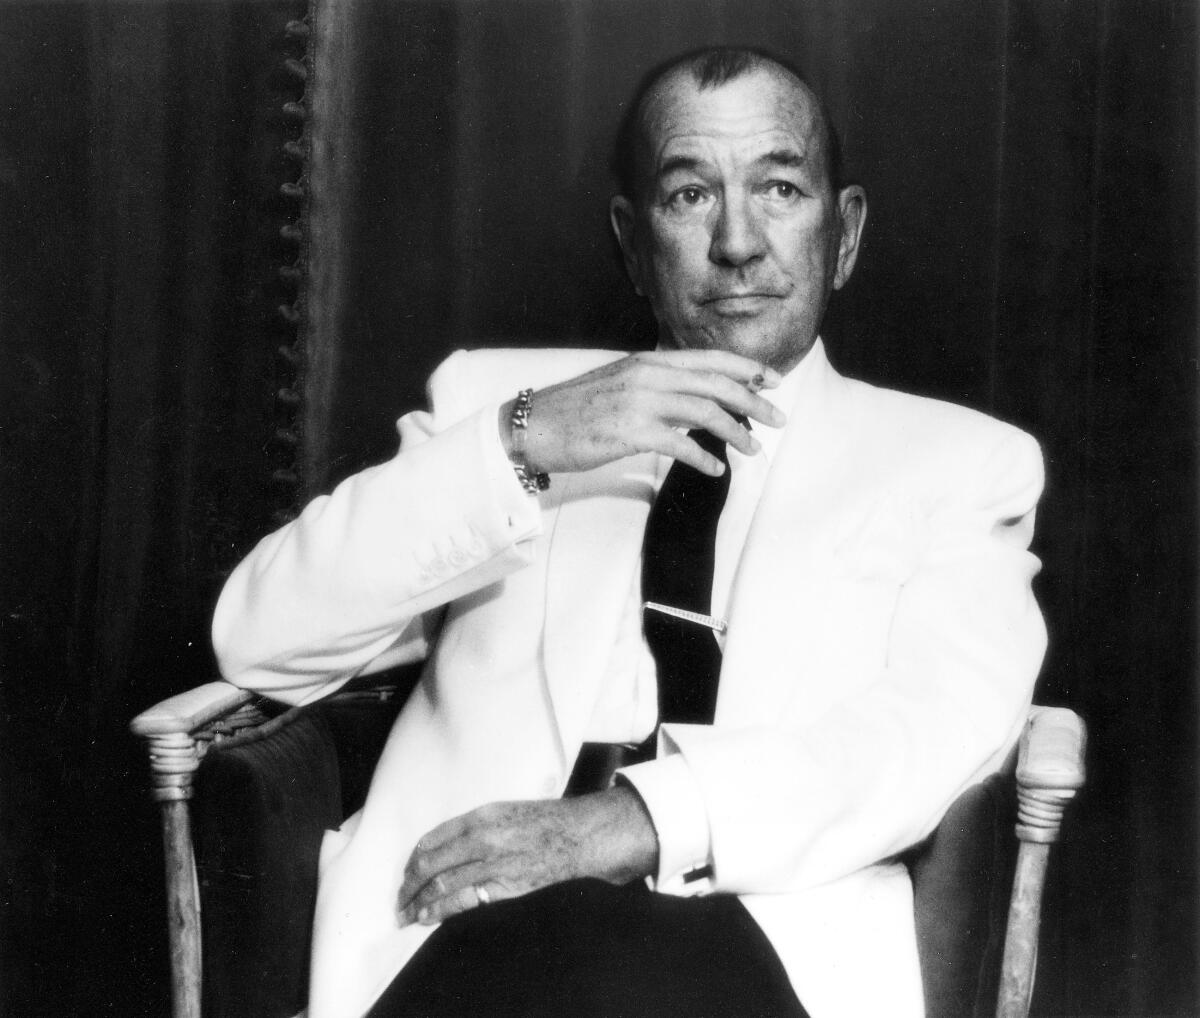 Noel Coward, wearing a white formal jacket, sits in a wooden chair.